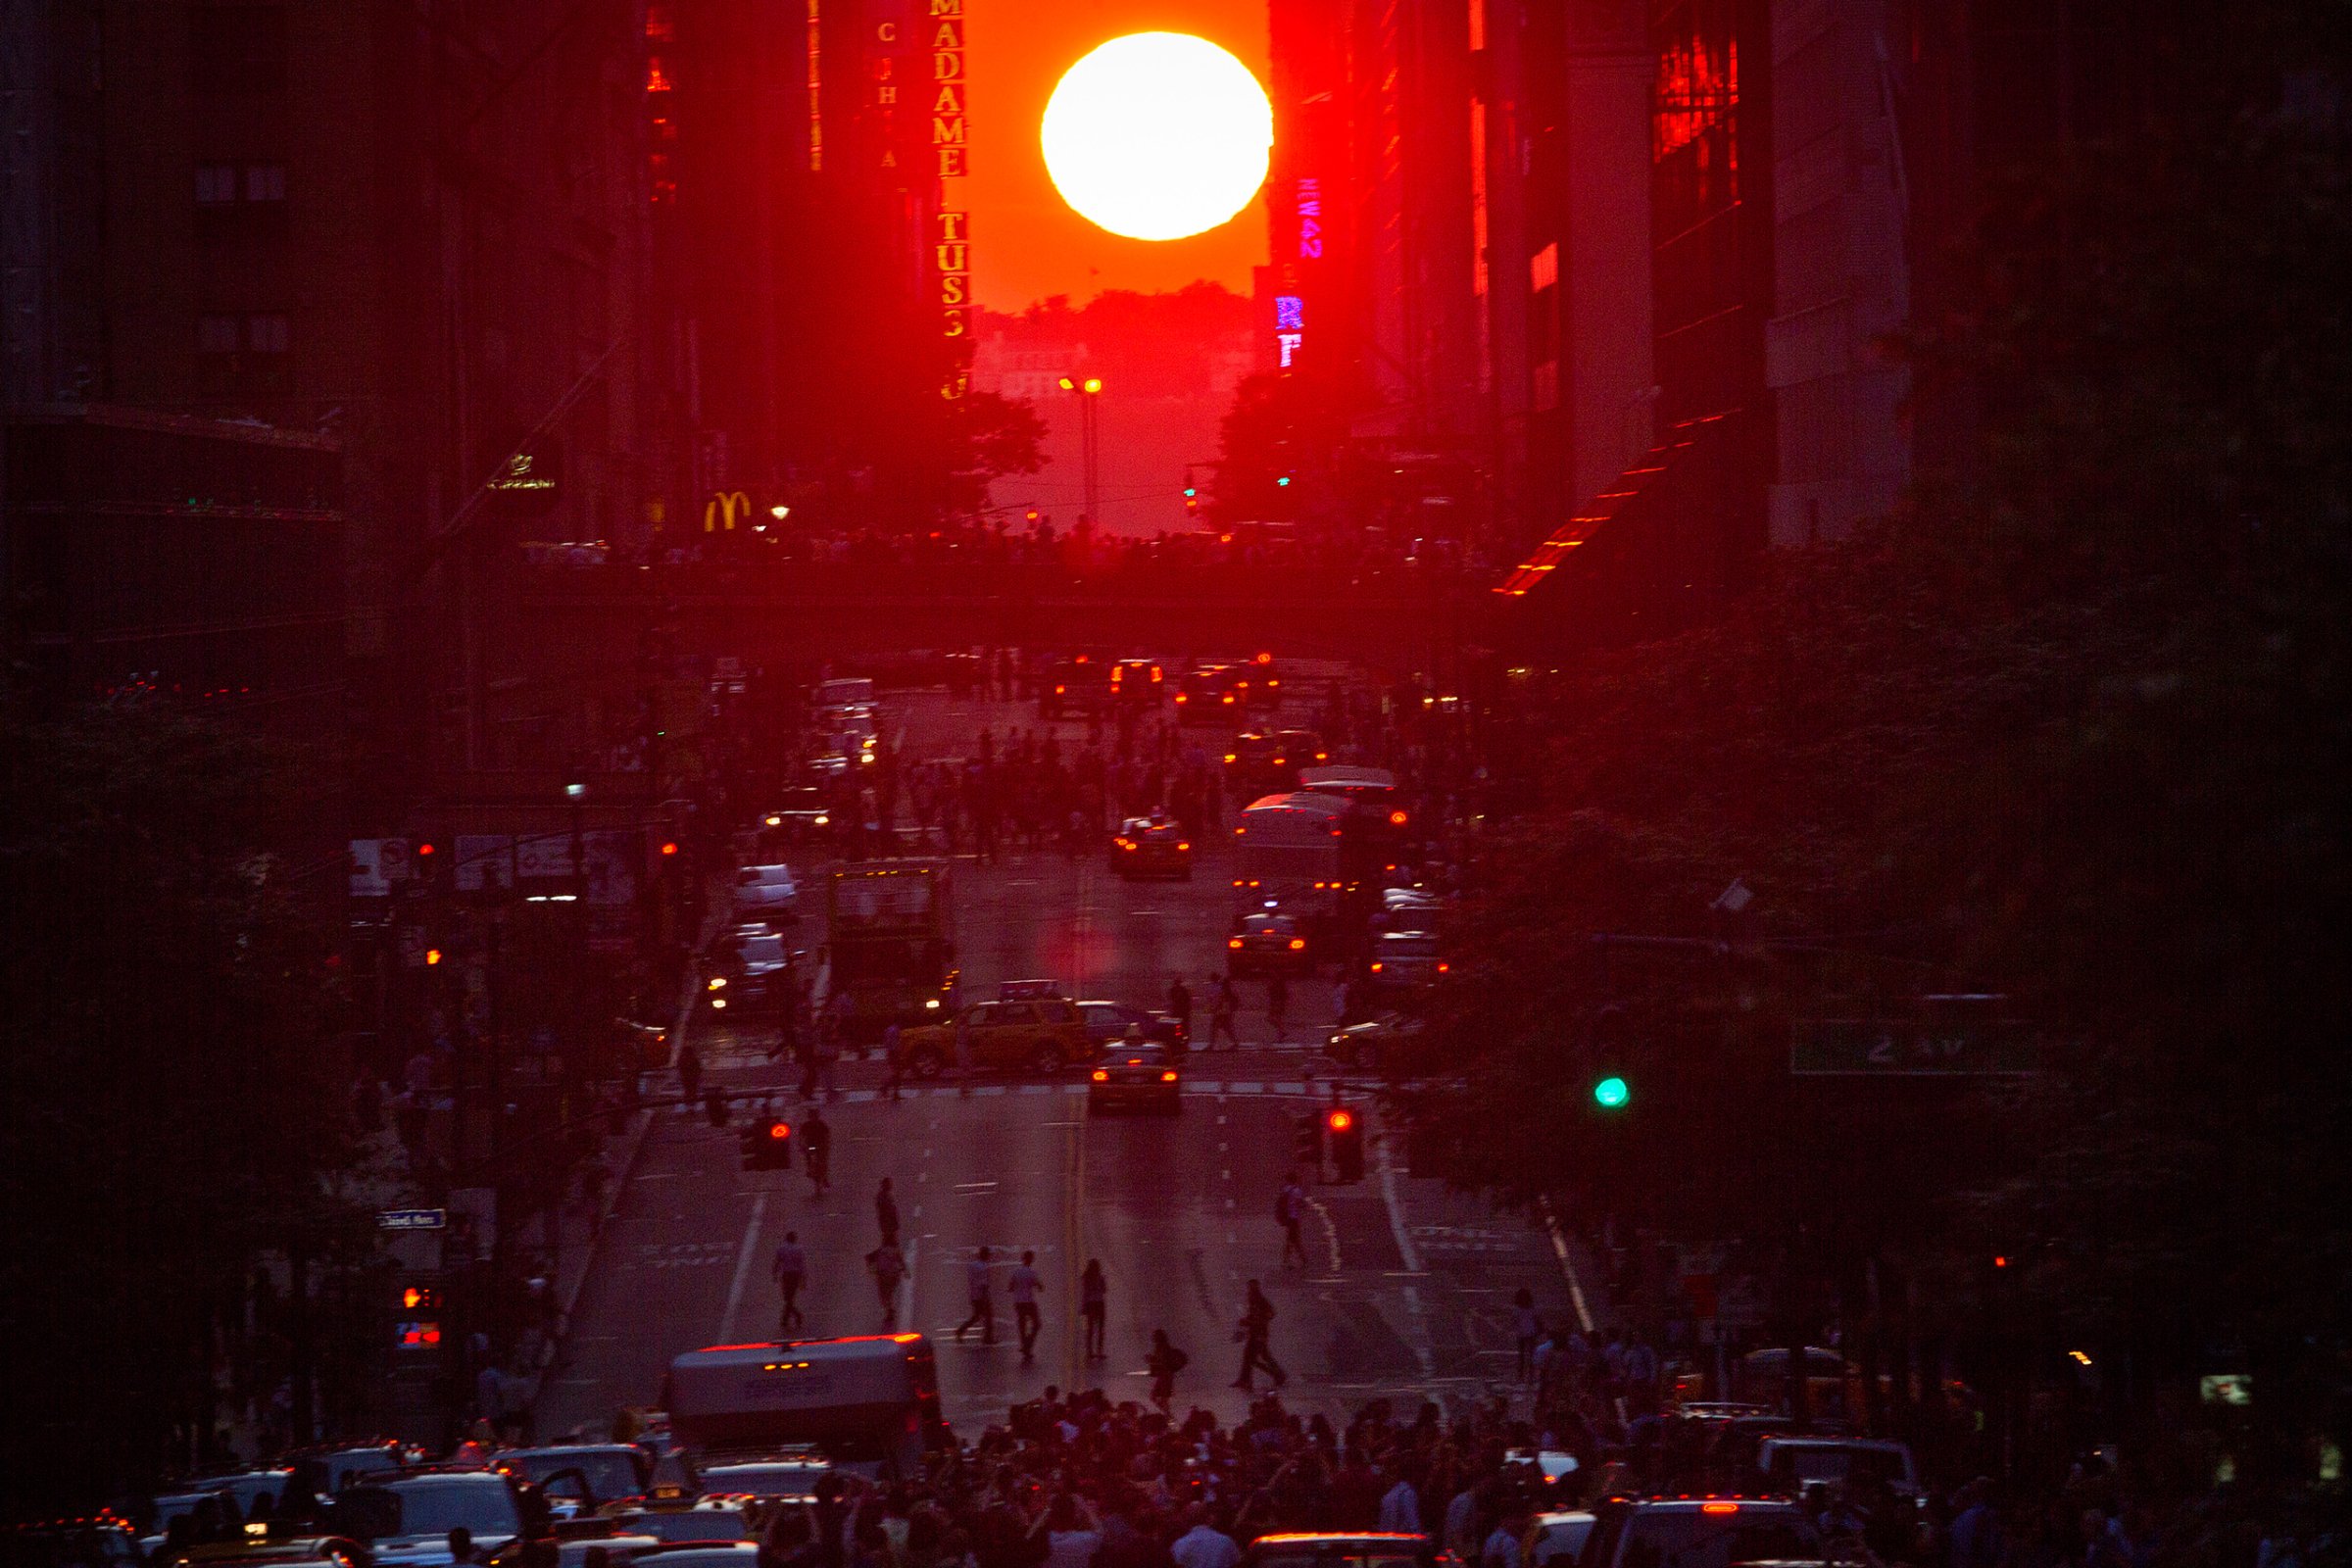 People crowd onto 42nd Street as they take photos of the "Manhattanhenge" phenomenon in the Manhattan borough of New York July 11, 2014. Manhattanhenge, coined by astrophysicist Neil deGrasse Tyson, occurs twice a year, when the setting sun aligns itself with the east-west grid of streets in Manhattan. REUTERS/Carlo Allegri (UNITED STATES - Tags: SOCIETY TPX IMAGES OF THE DAY) - RTR3Y8KN